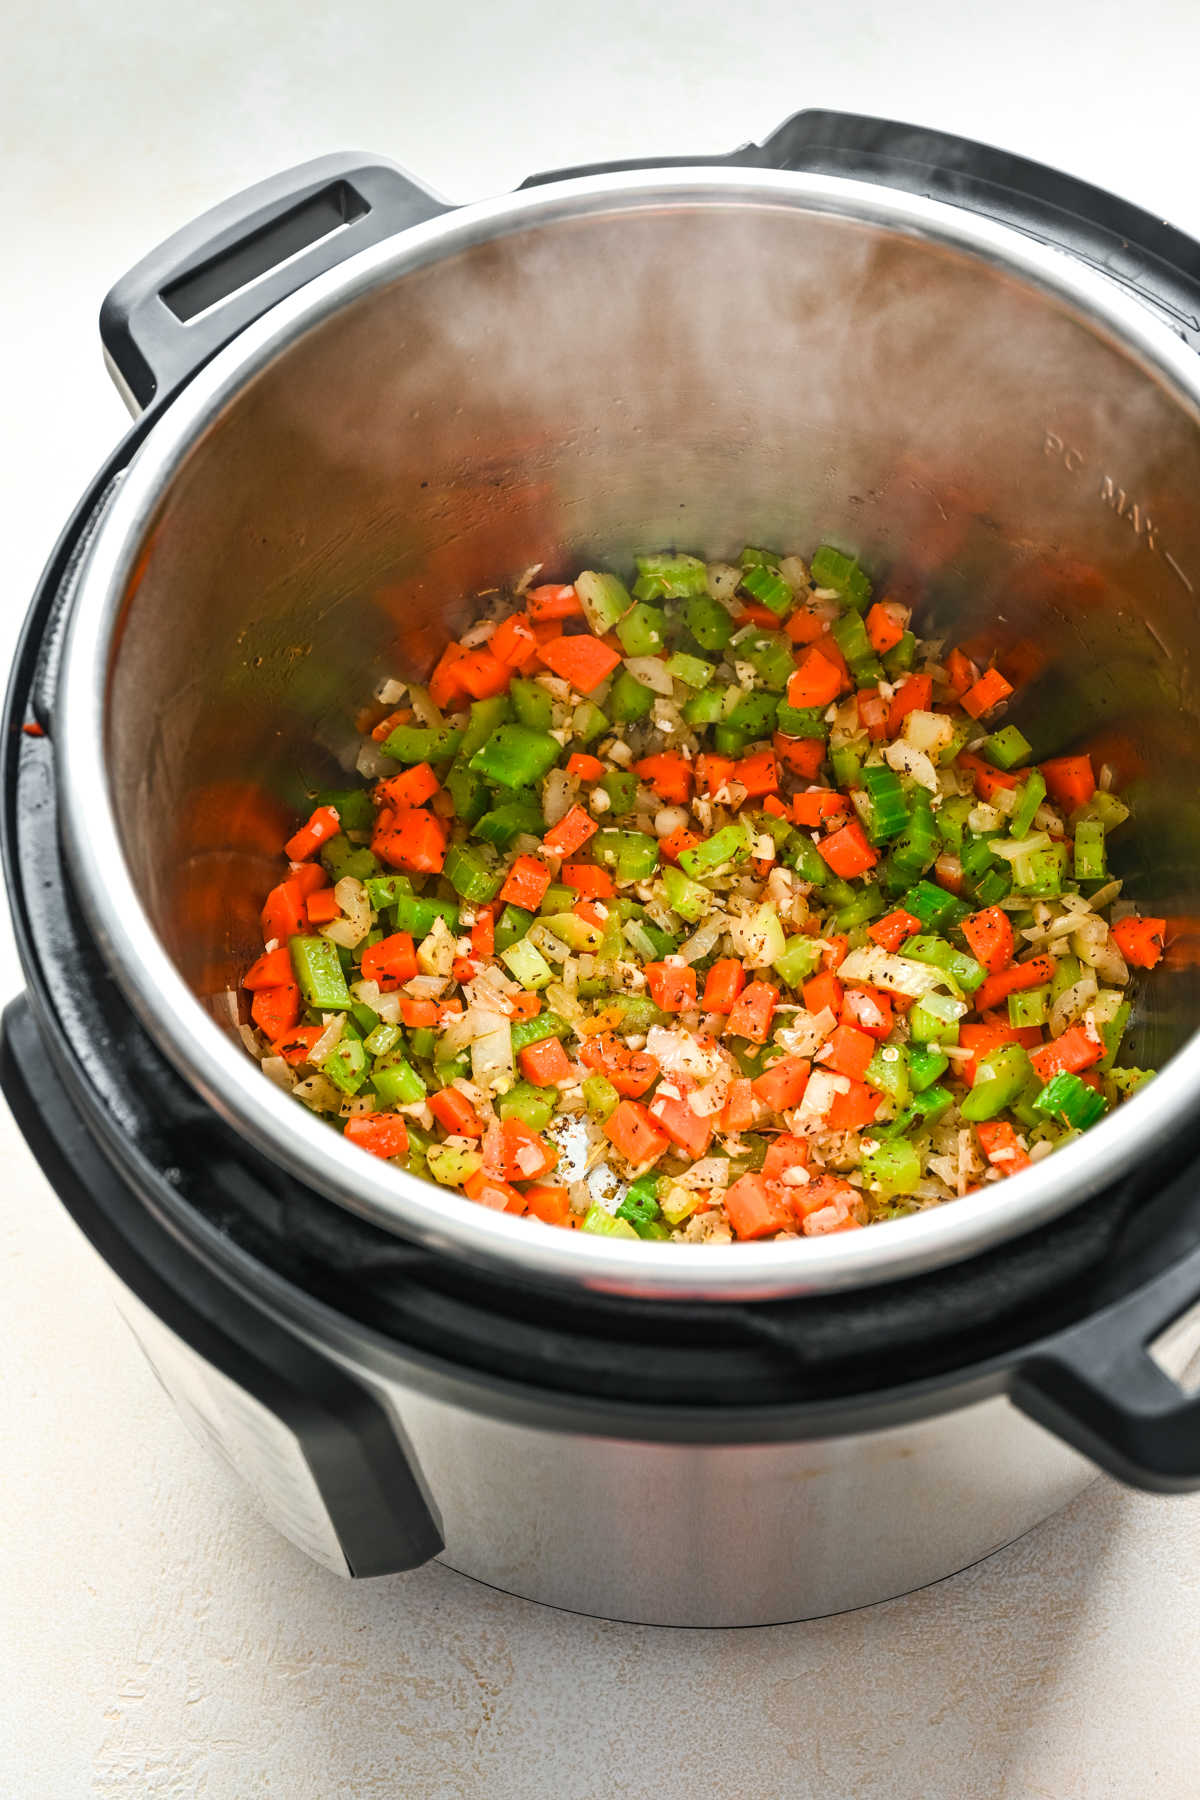 Italian seasoning and pepper on top of sauteed vegetables in an Instant Pot.